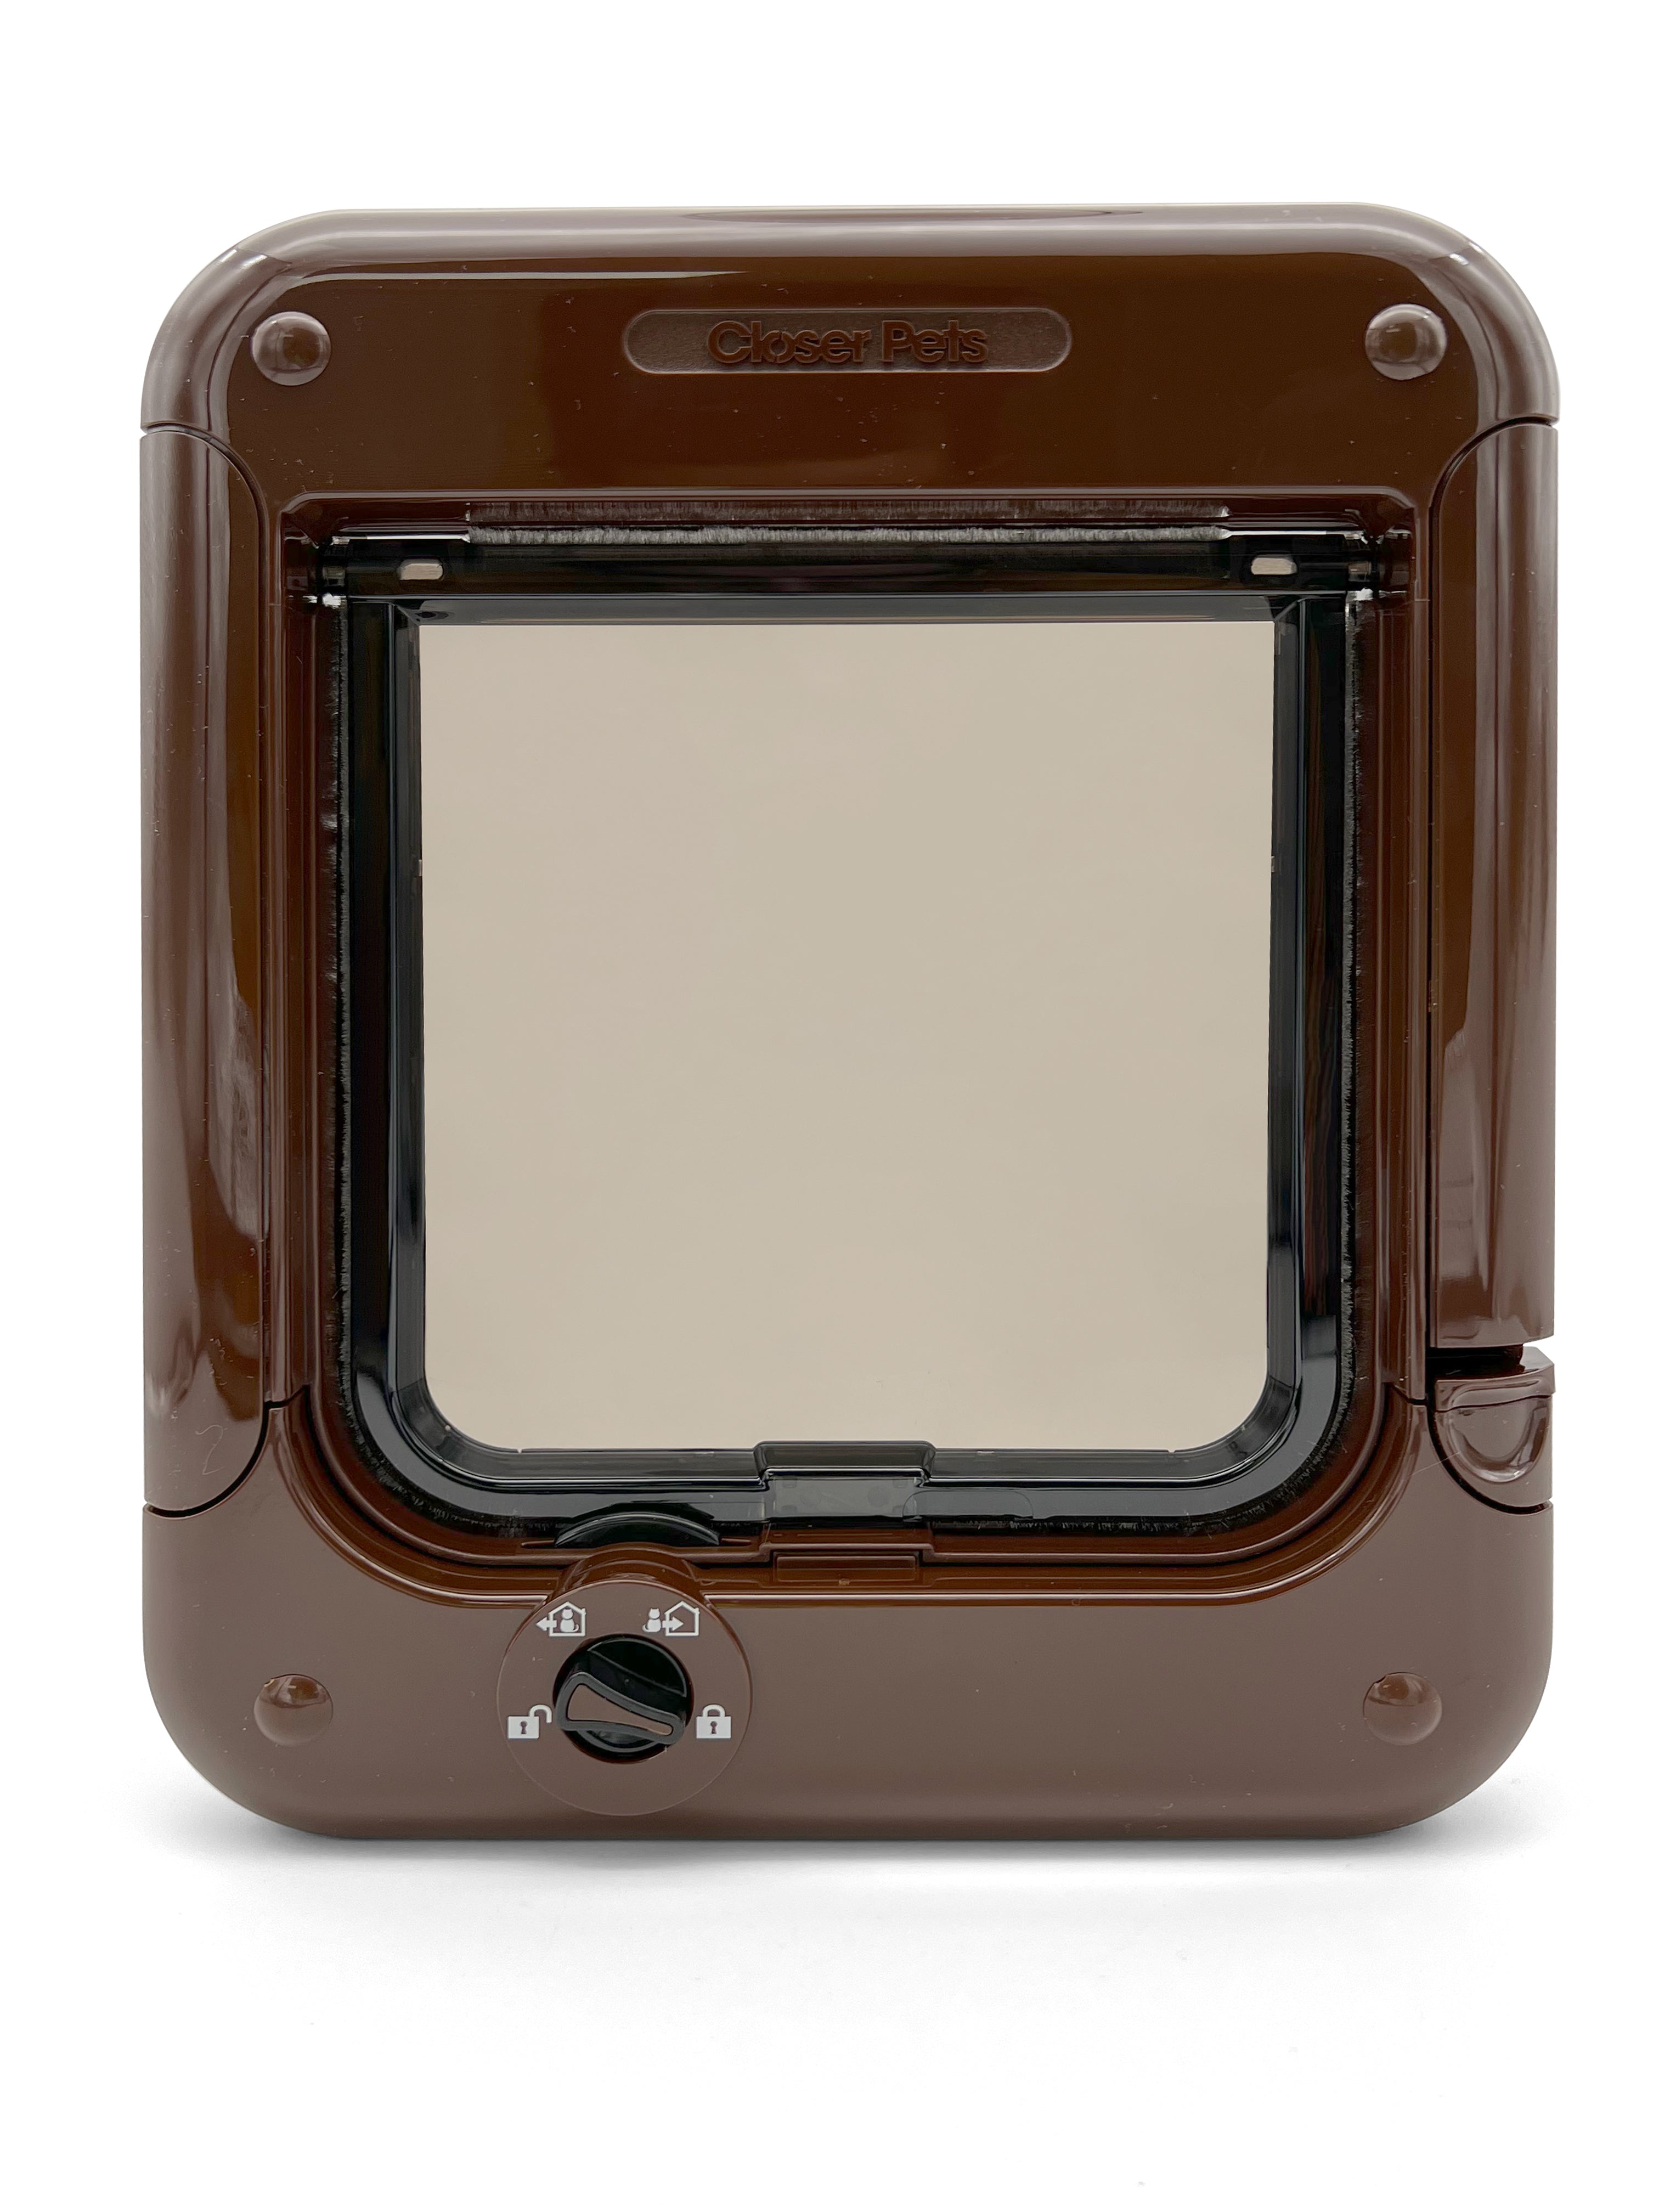 Closer Pets Rotary 4-Way-Locking Cat Flap - Brown (CP358)